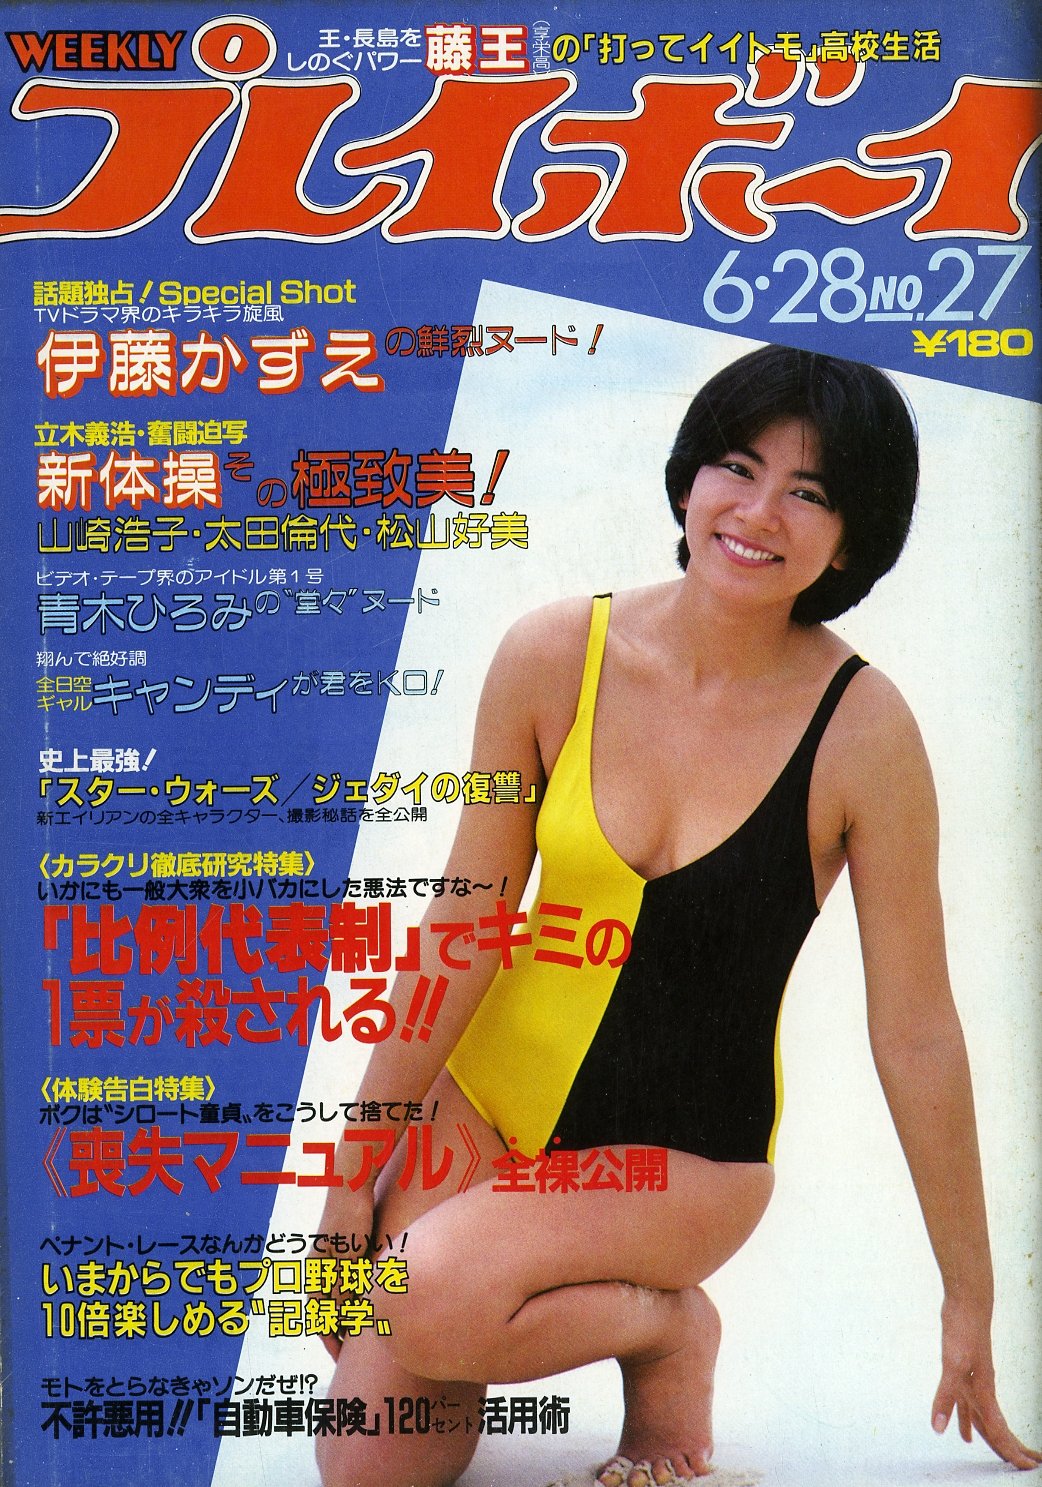 weekly play boy 週刊プレイボーイ 週刊大衆 2023 2冊セット